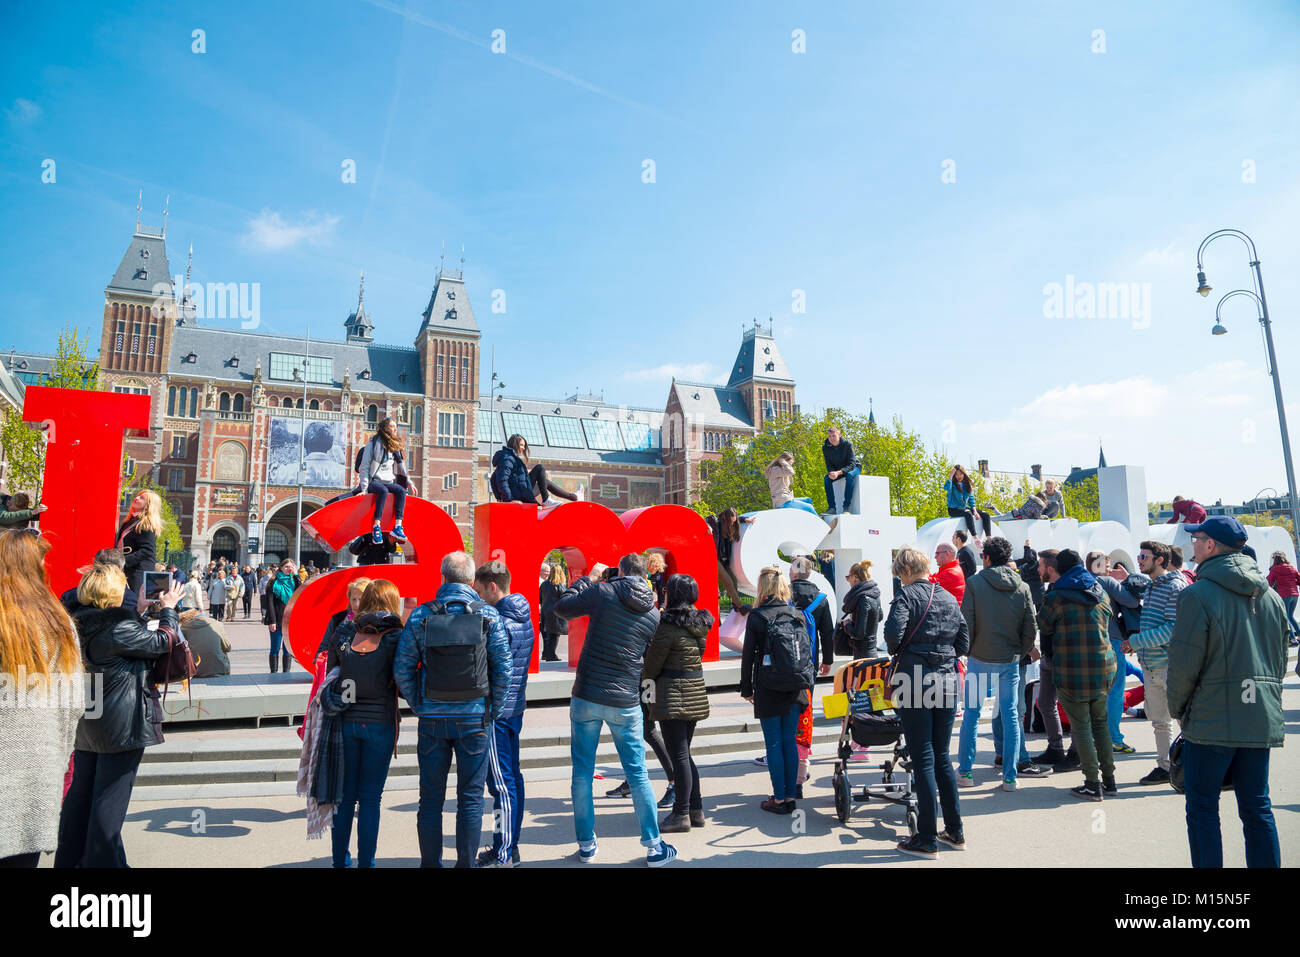 Amsterdam, Netherlands - April 20, 2017: The I Amsterdam sign in front of the Rijksmuseum is an attraction for tourists wanting to take pictures Stock Photo